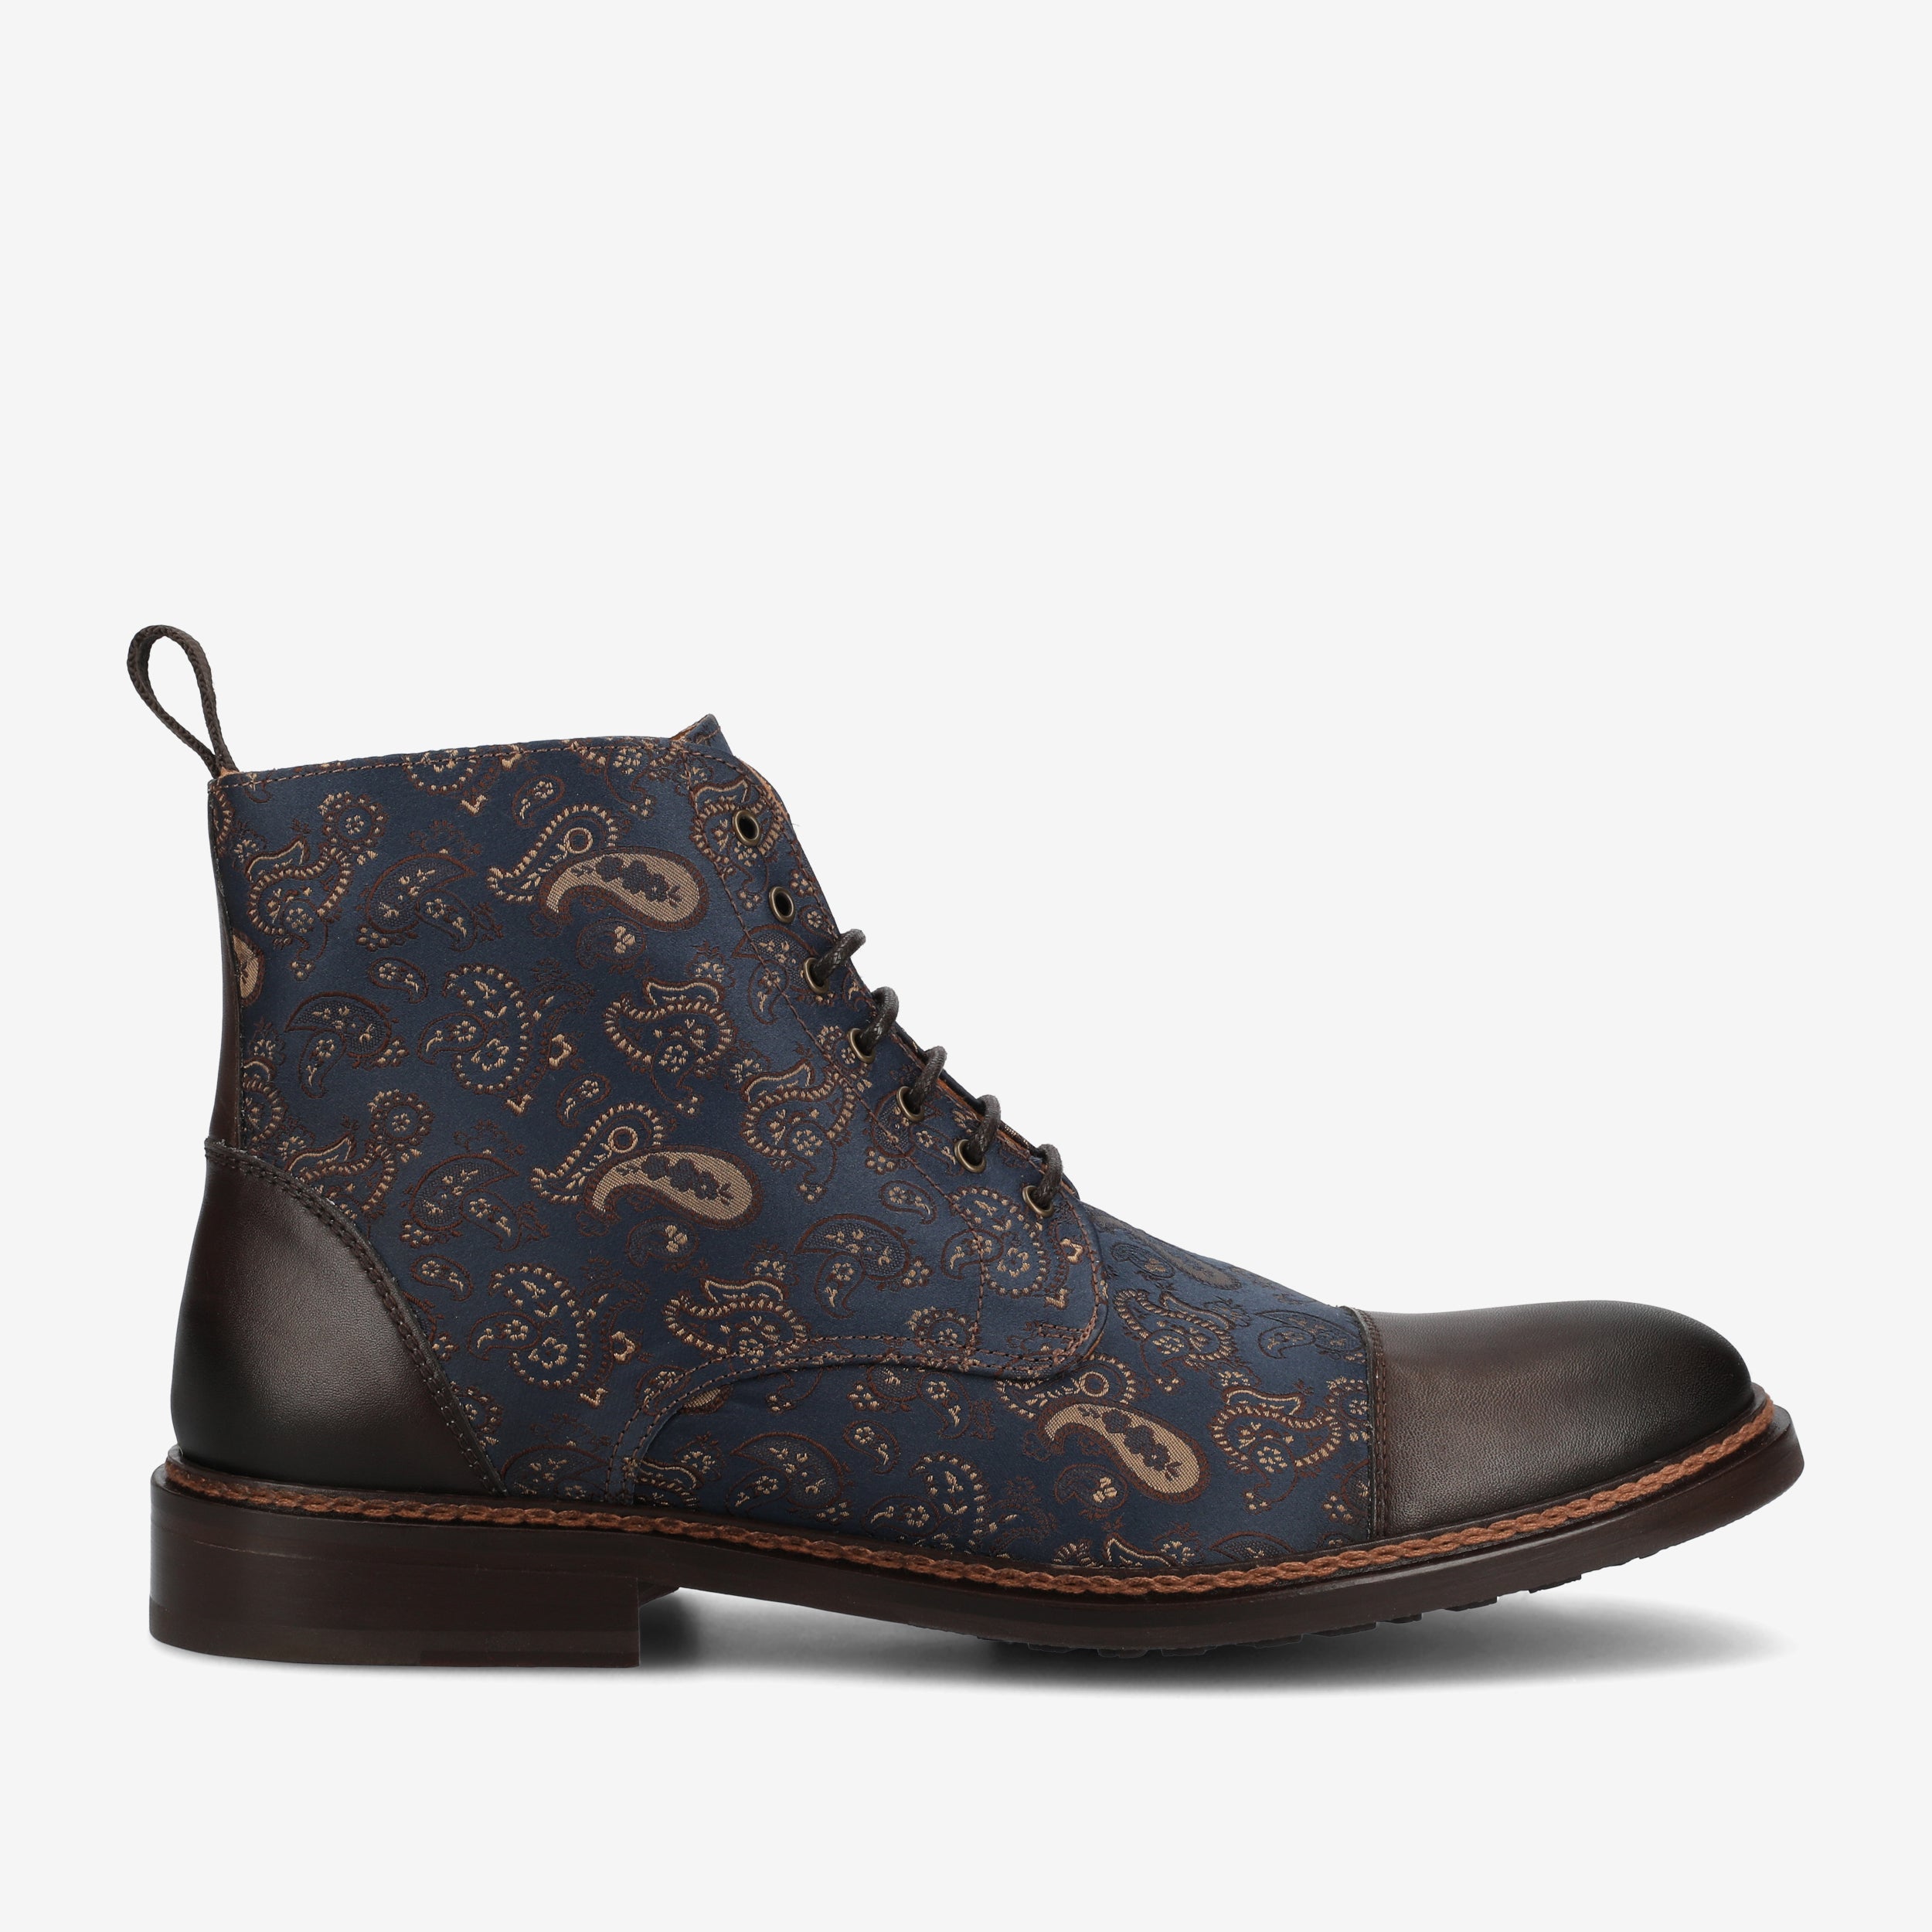 The Jack in Brown Paisley